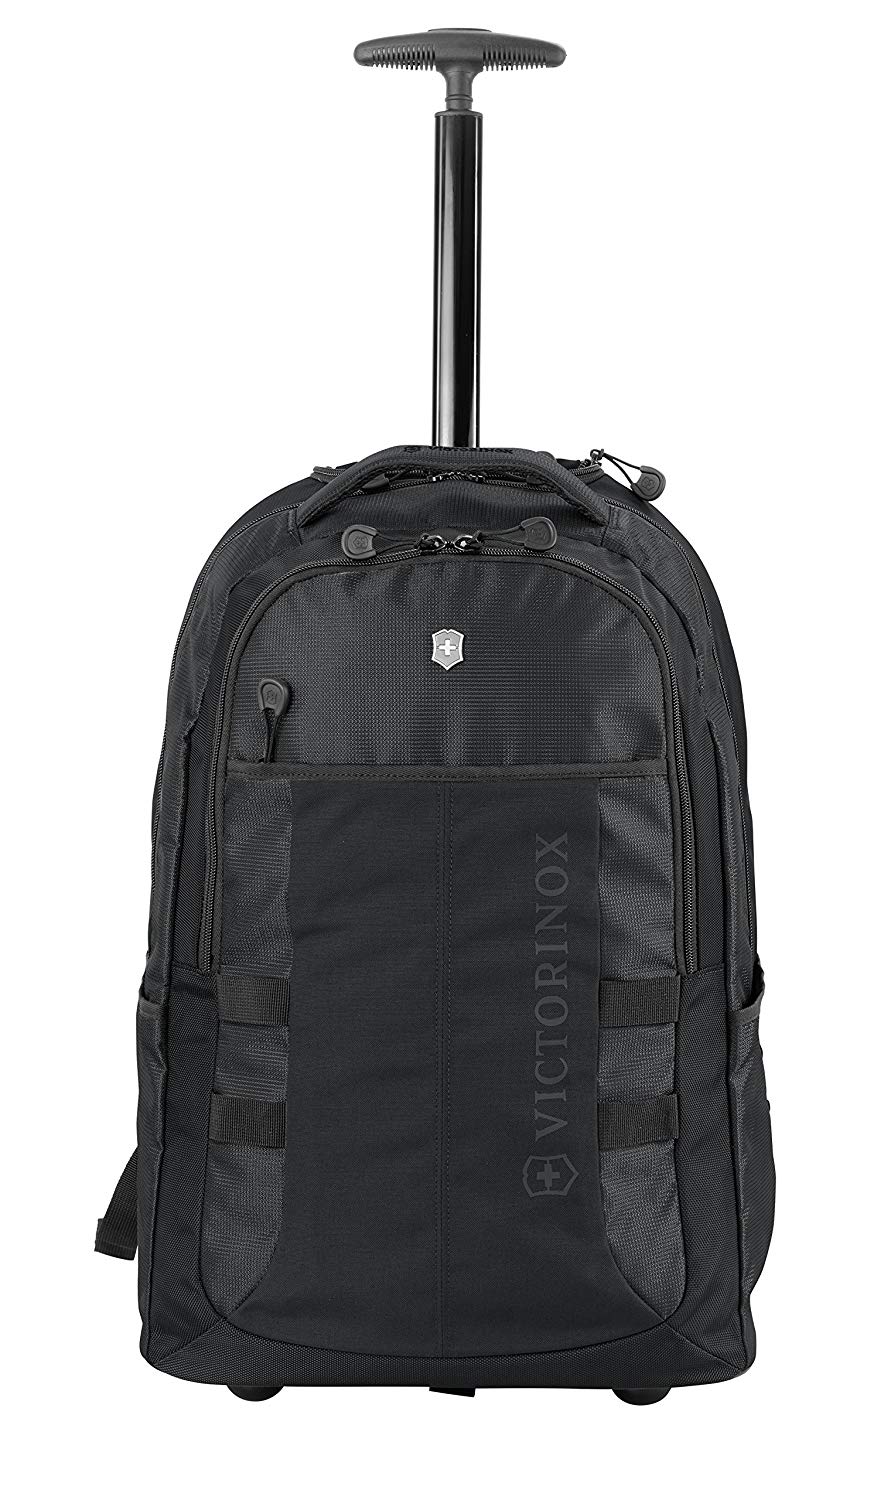 14 Best Backpacks with Wheels (2022 